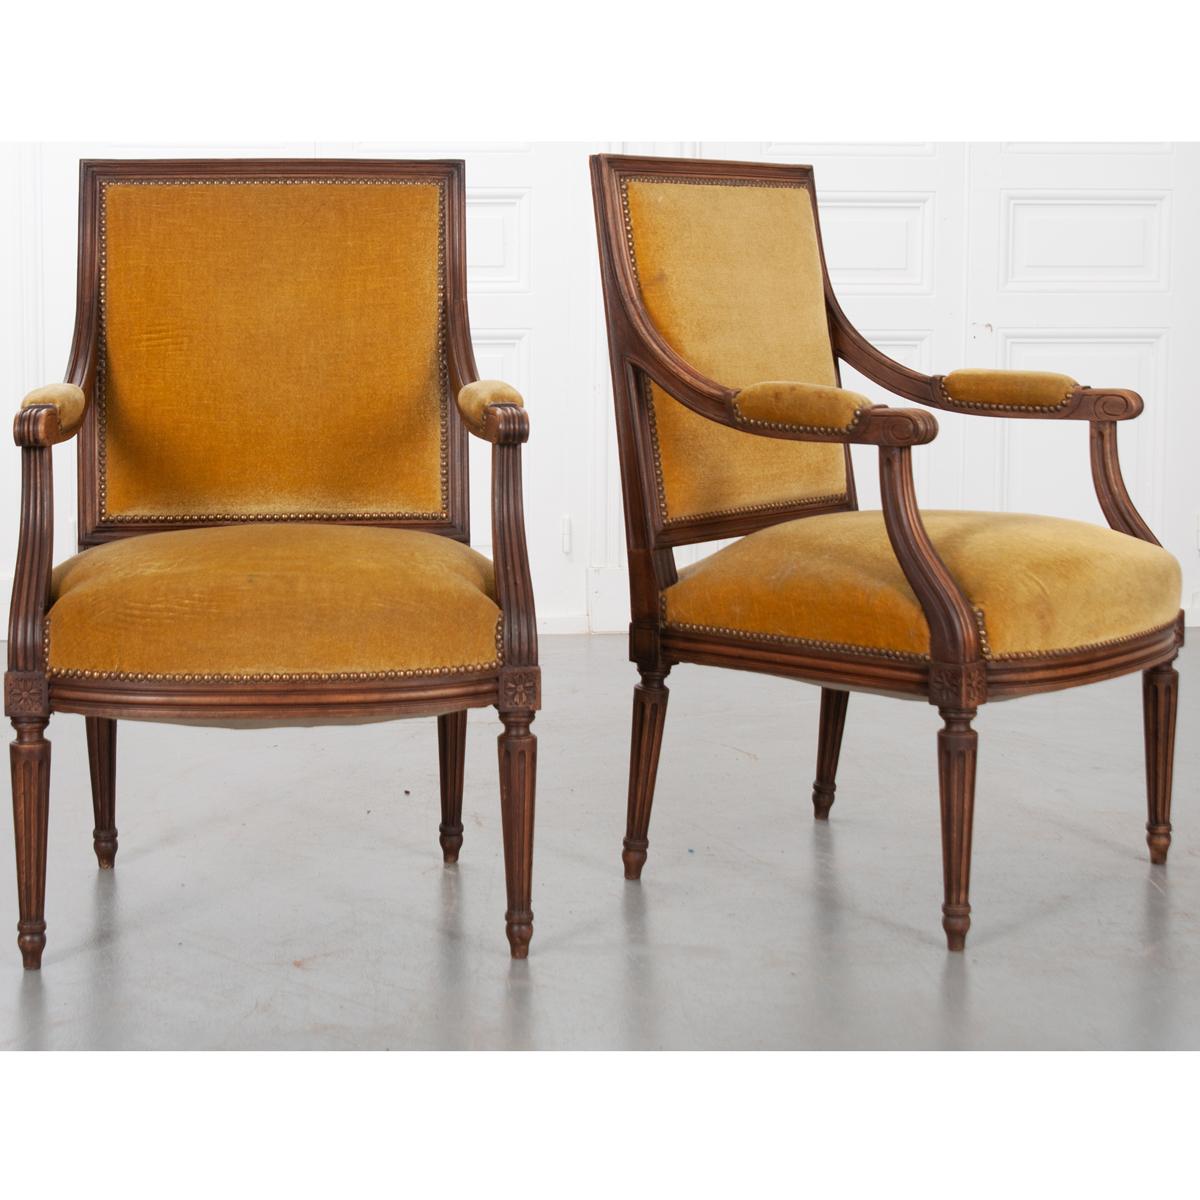 An incredibly handsome pair of French Louis-XVI style oak Fauteuils, c. 1880. The pair has yellow/gold antique upholstery with a slight green tint, all trimmed with a nailhead border. They have exceptional frames and are adorned with fabulous